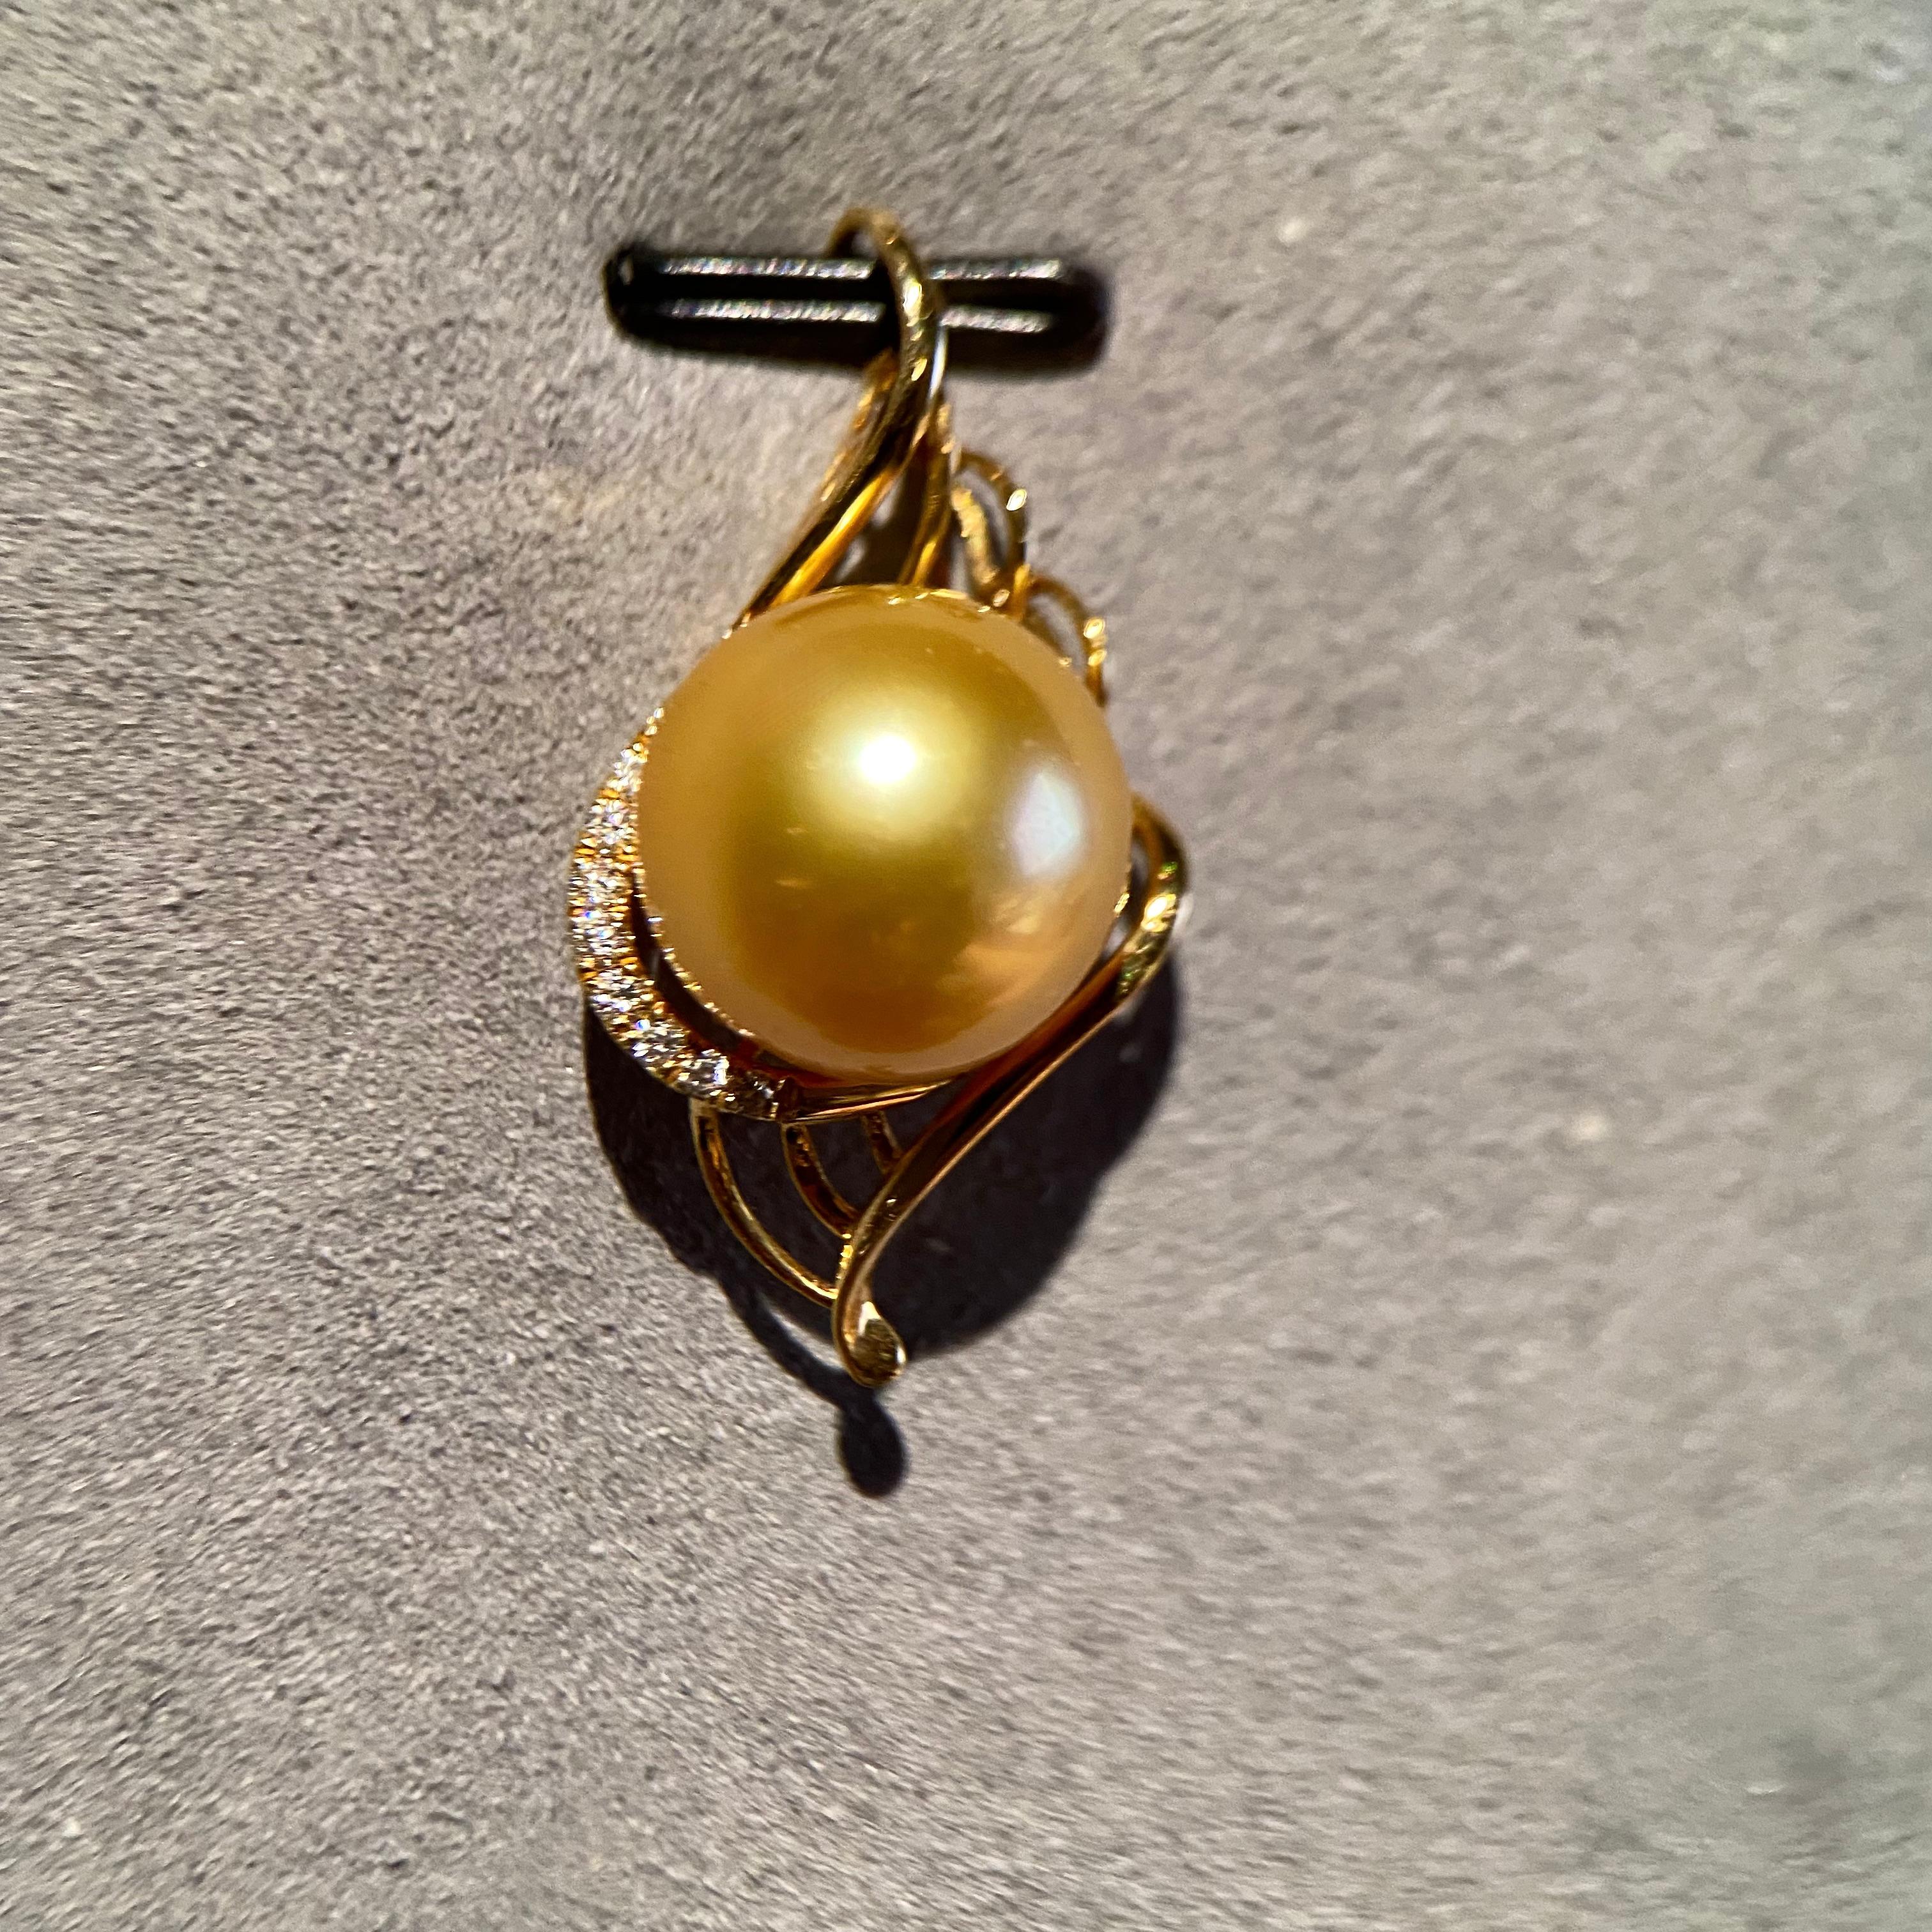 A 11.1 mm Light Golden Colour South Sea Pearl and Diamond Pendant in 18k Yellow Gold
It consists of a round Shape South Sea Pearl with excellent Lustre and Very Minor Surface Blemish.
The Pearl is Light Gold in colour with Pink Overtone 
Total